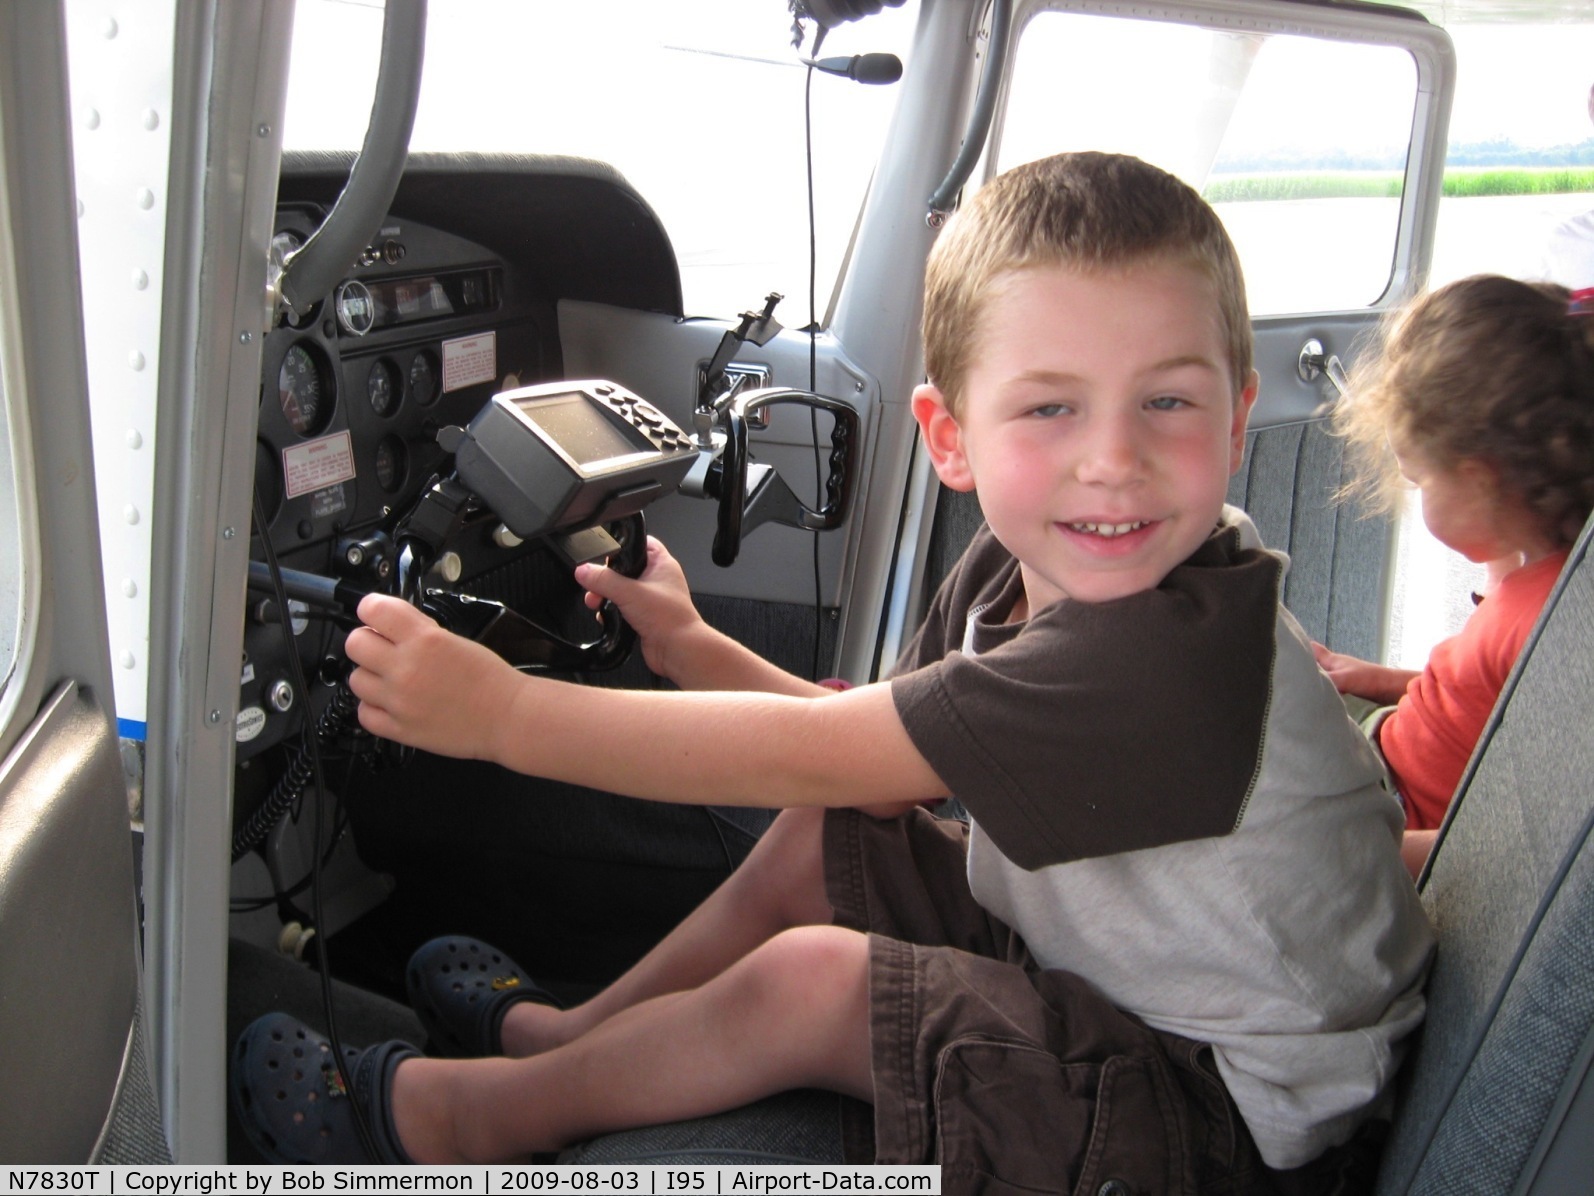 N7830T, 1960 Cessna 172A C/N 47430, Landon & Avery after their 1st plane ride.